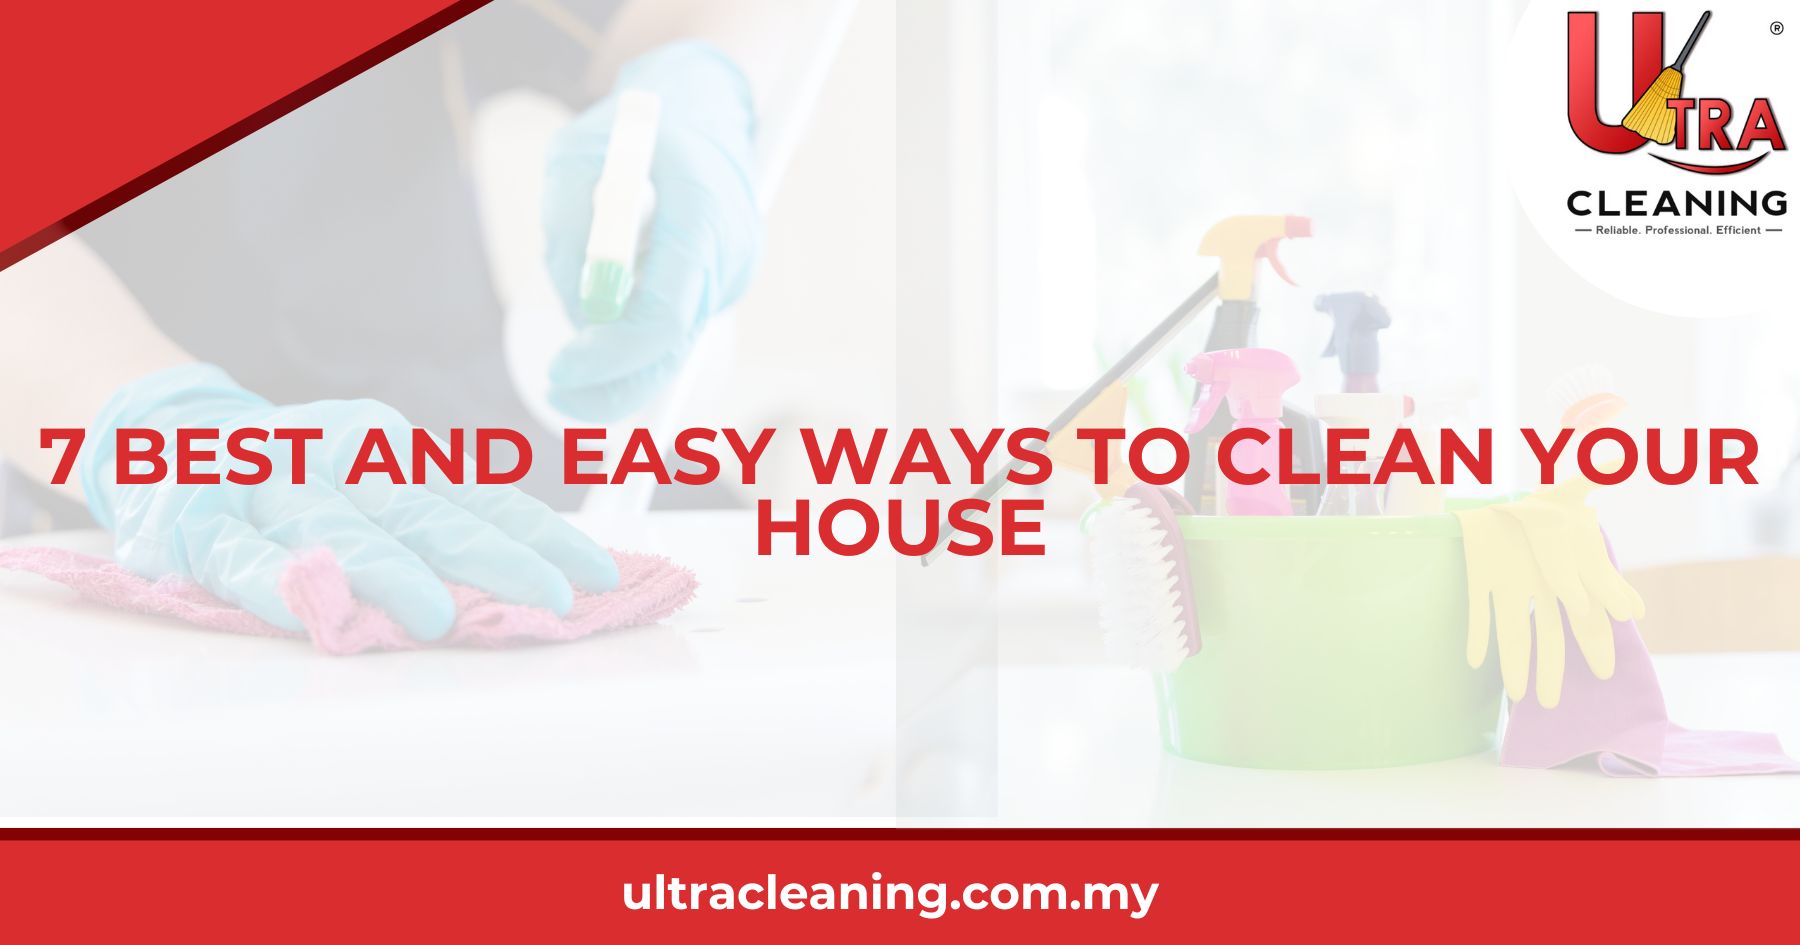 7 Best and Easy Ways to Clean Your House